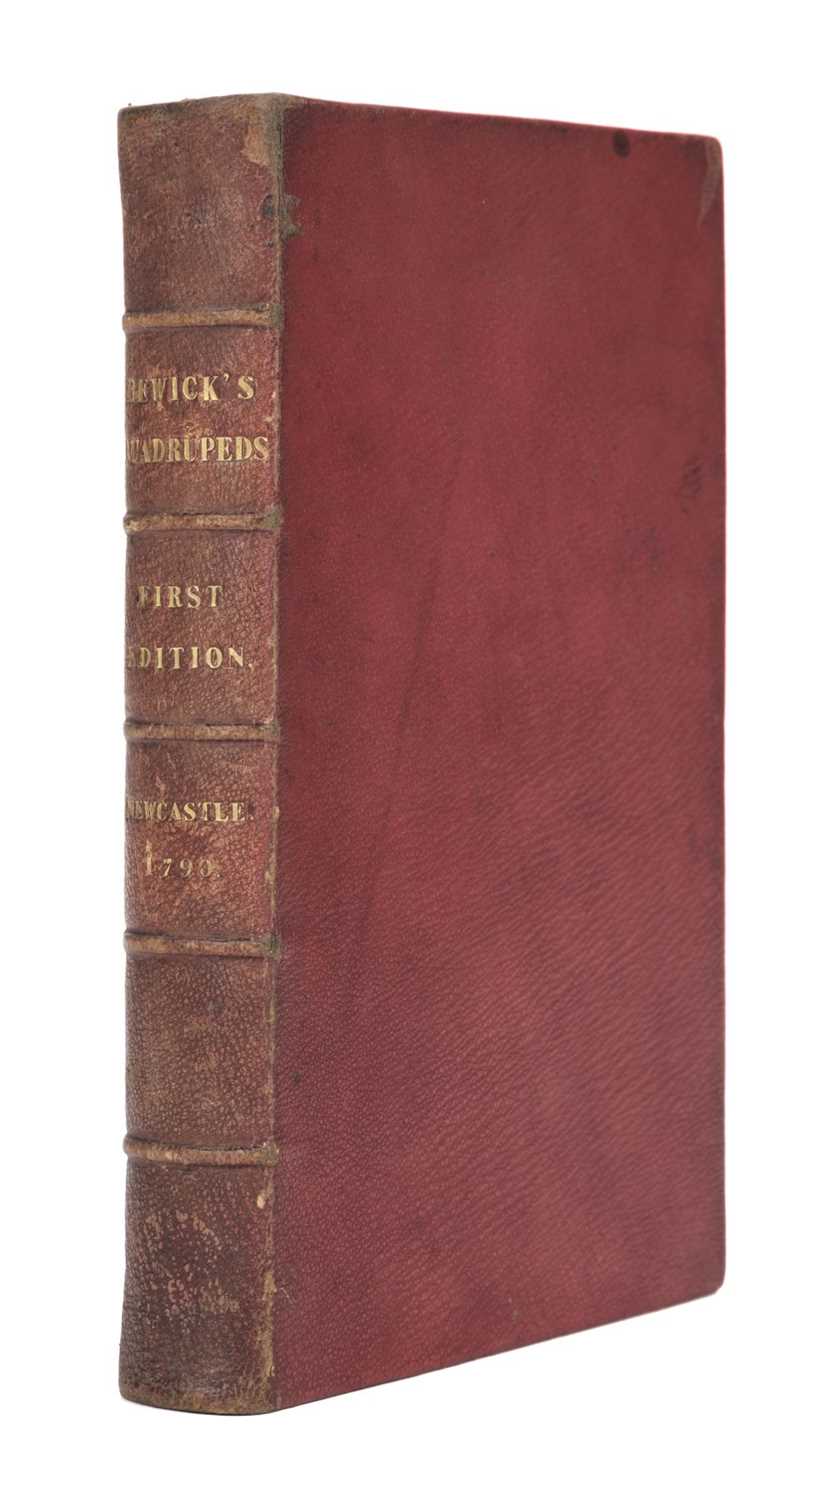 Lot 125 - Bewick (Thomas). A General History of Quadrupeds, 1st edition, Newcastle, 1790